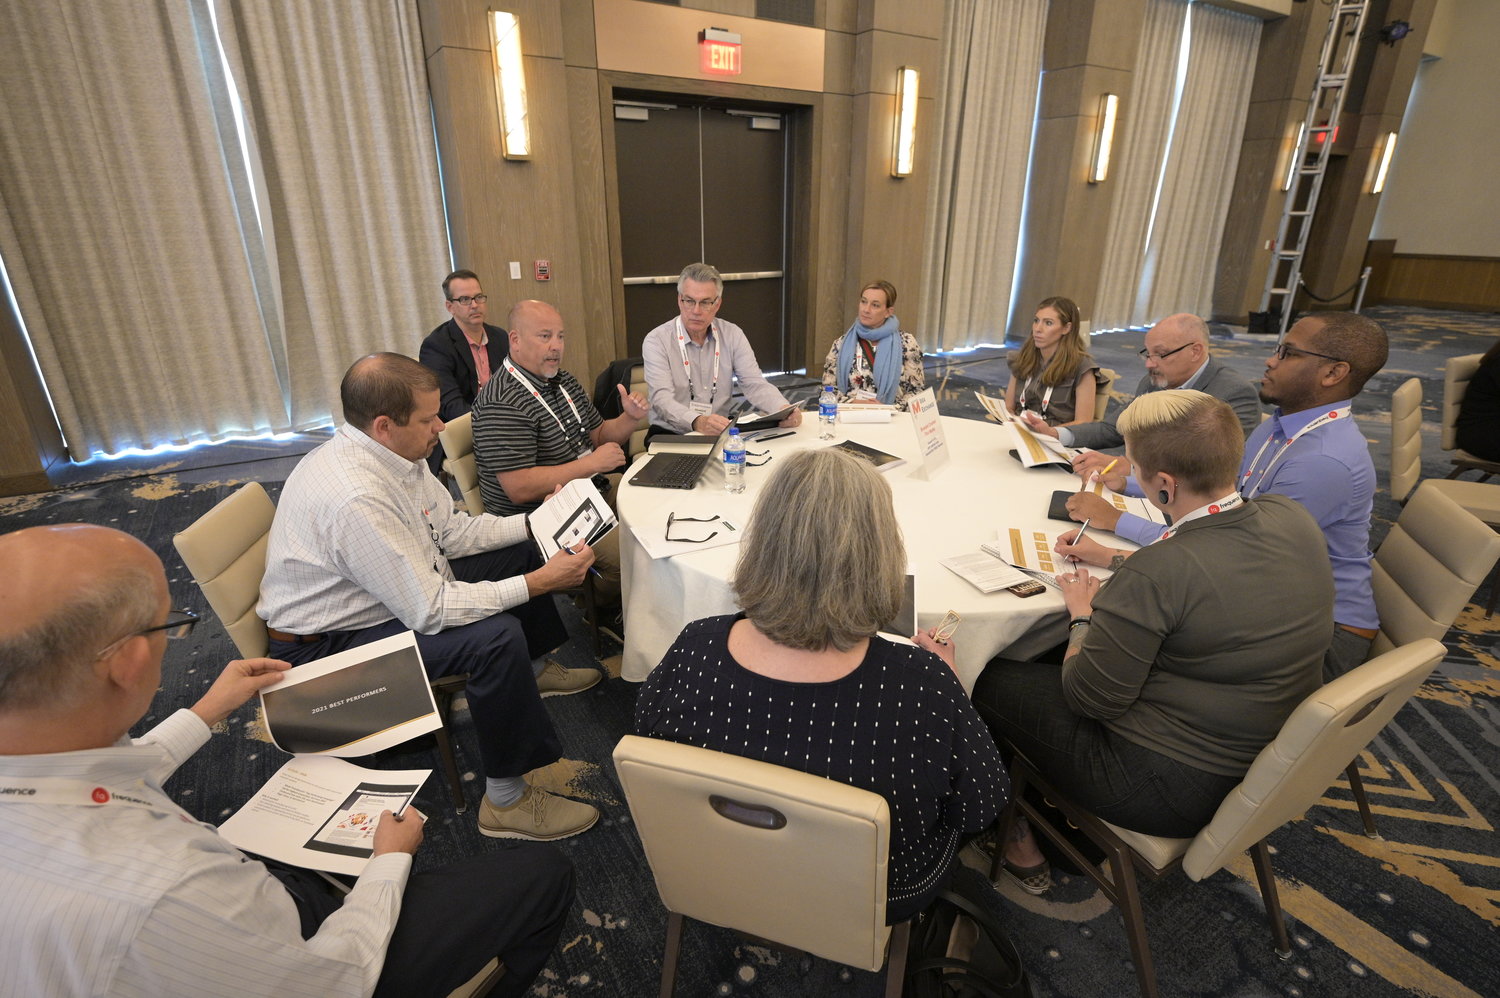 Branded content was the topic at this Roundtable, led by Howard Griffin, SVP, national sales, Gannett/USA TODAY Network. (Photo by Phelan M. Ebenhack)